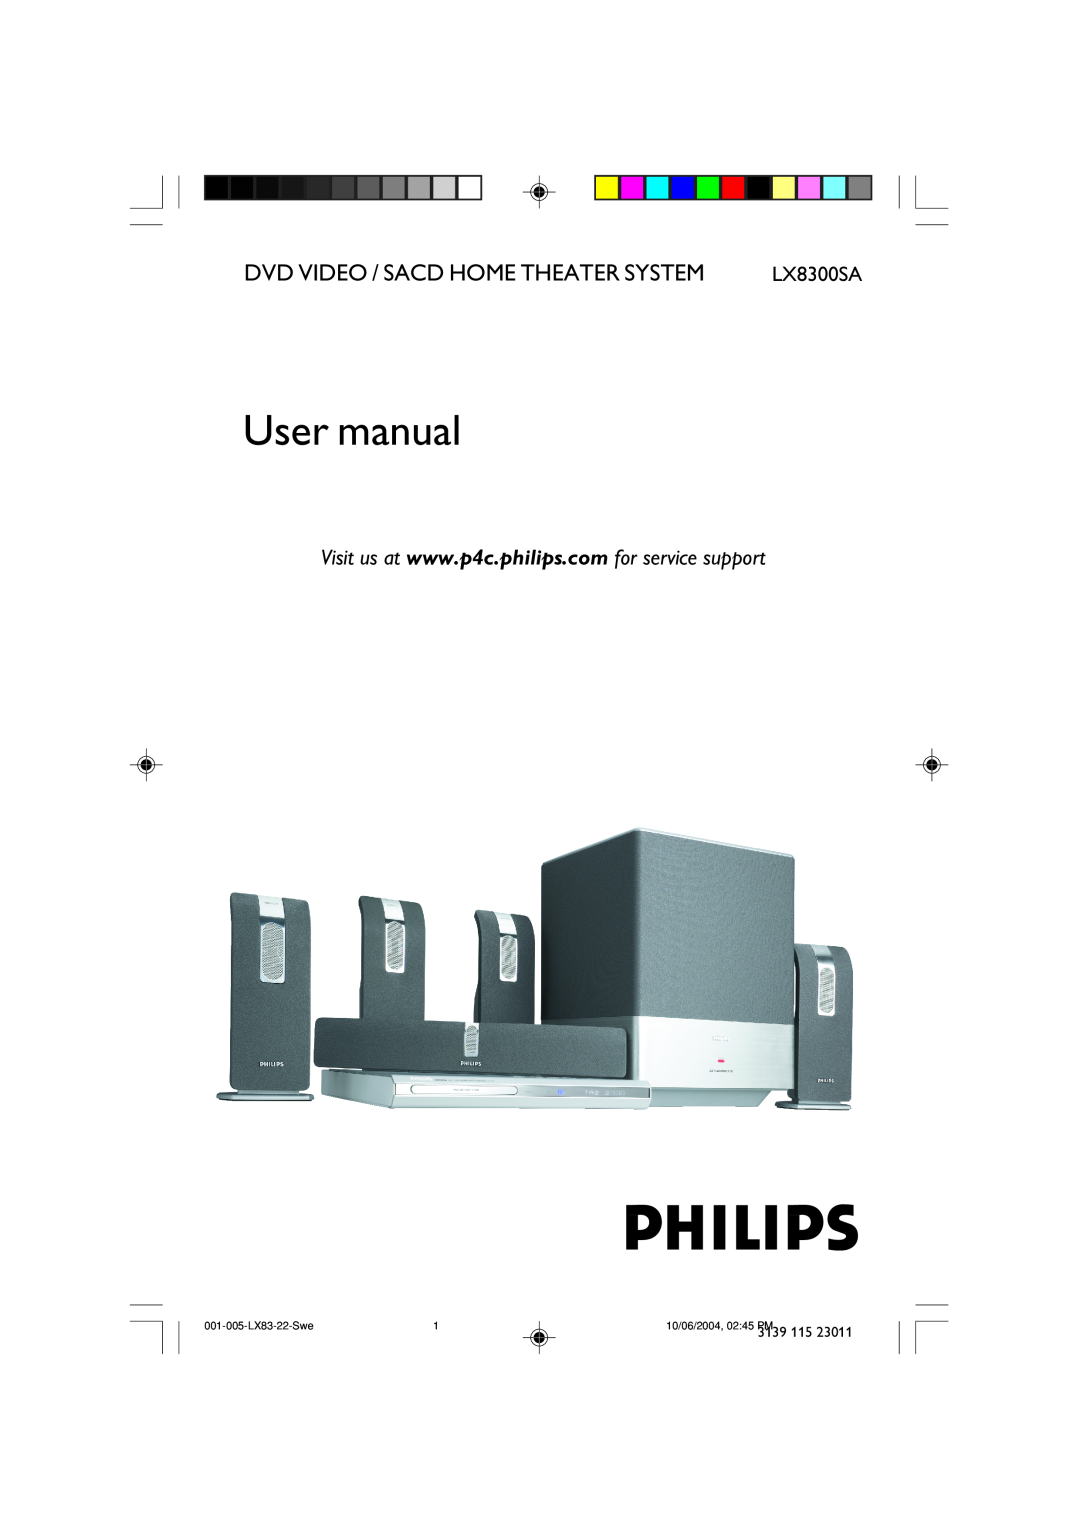 Philips LX8300SA user manual Dvd Video / Sacd Home Theater System, 001-005-LX83-22-Swe, 10/06/2004, 02 45 PM 